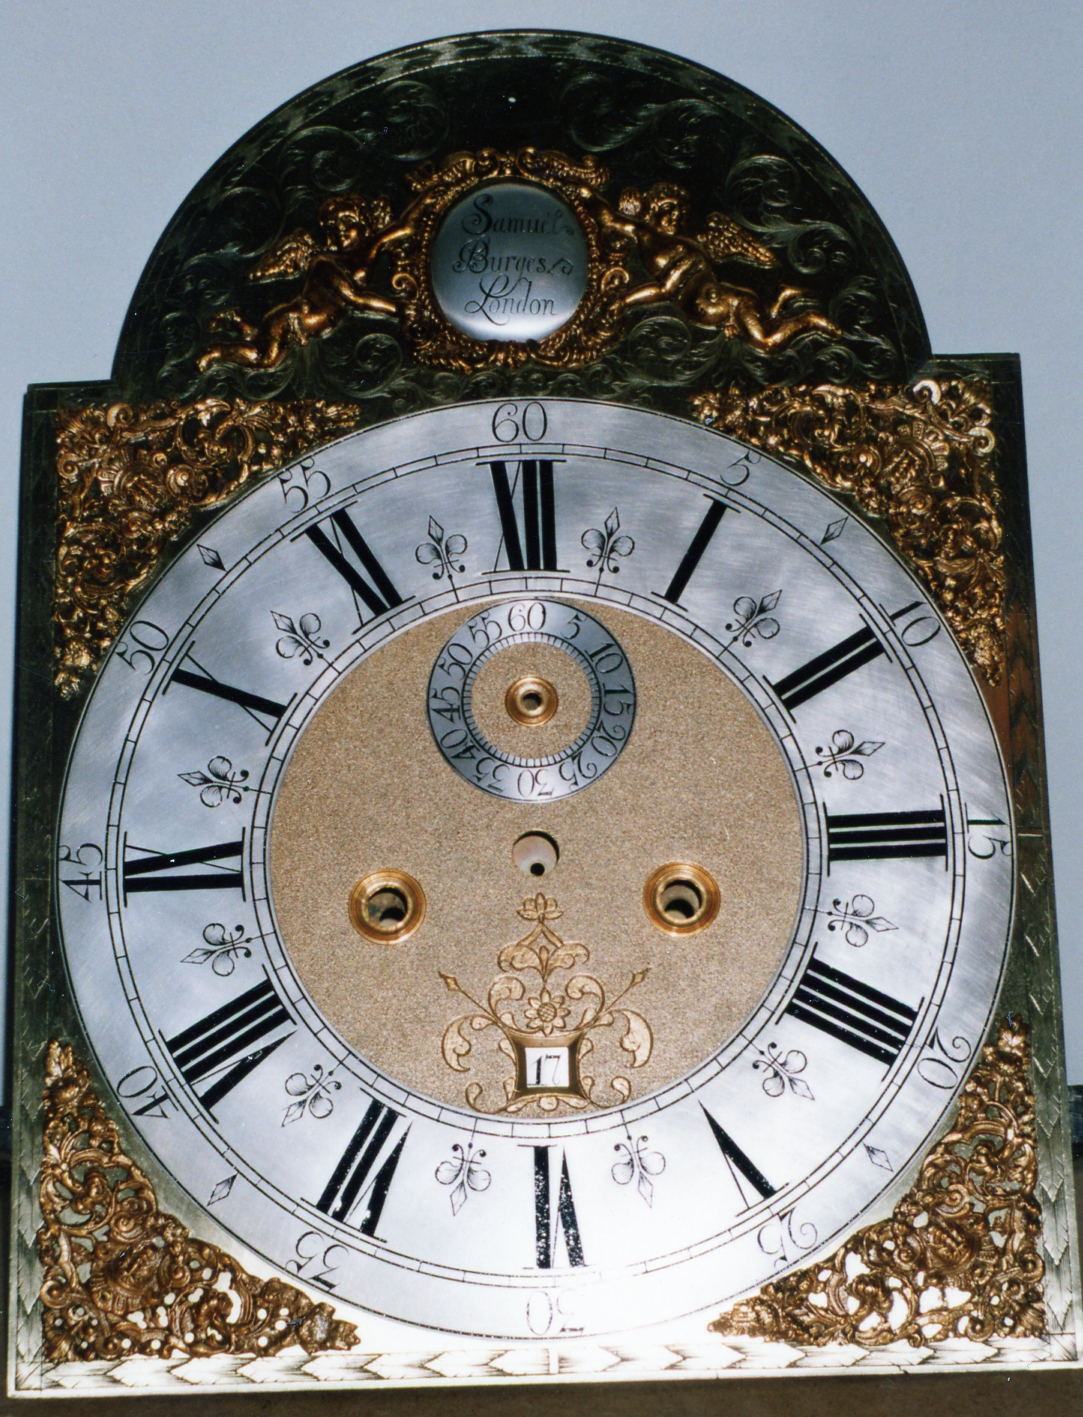 8-day arch dial clock by  clockmaker Samuel Burgess, London 1720 - 1730. Some features help to date this antique clock.